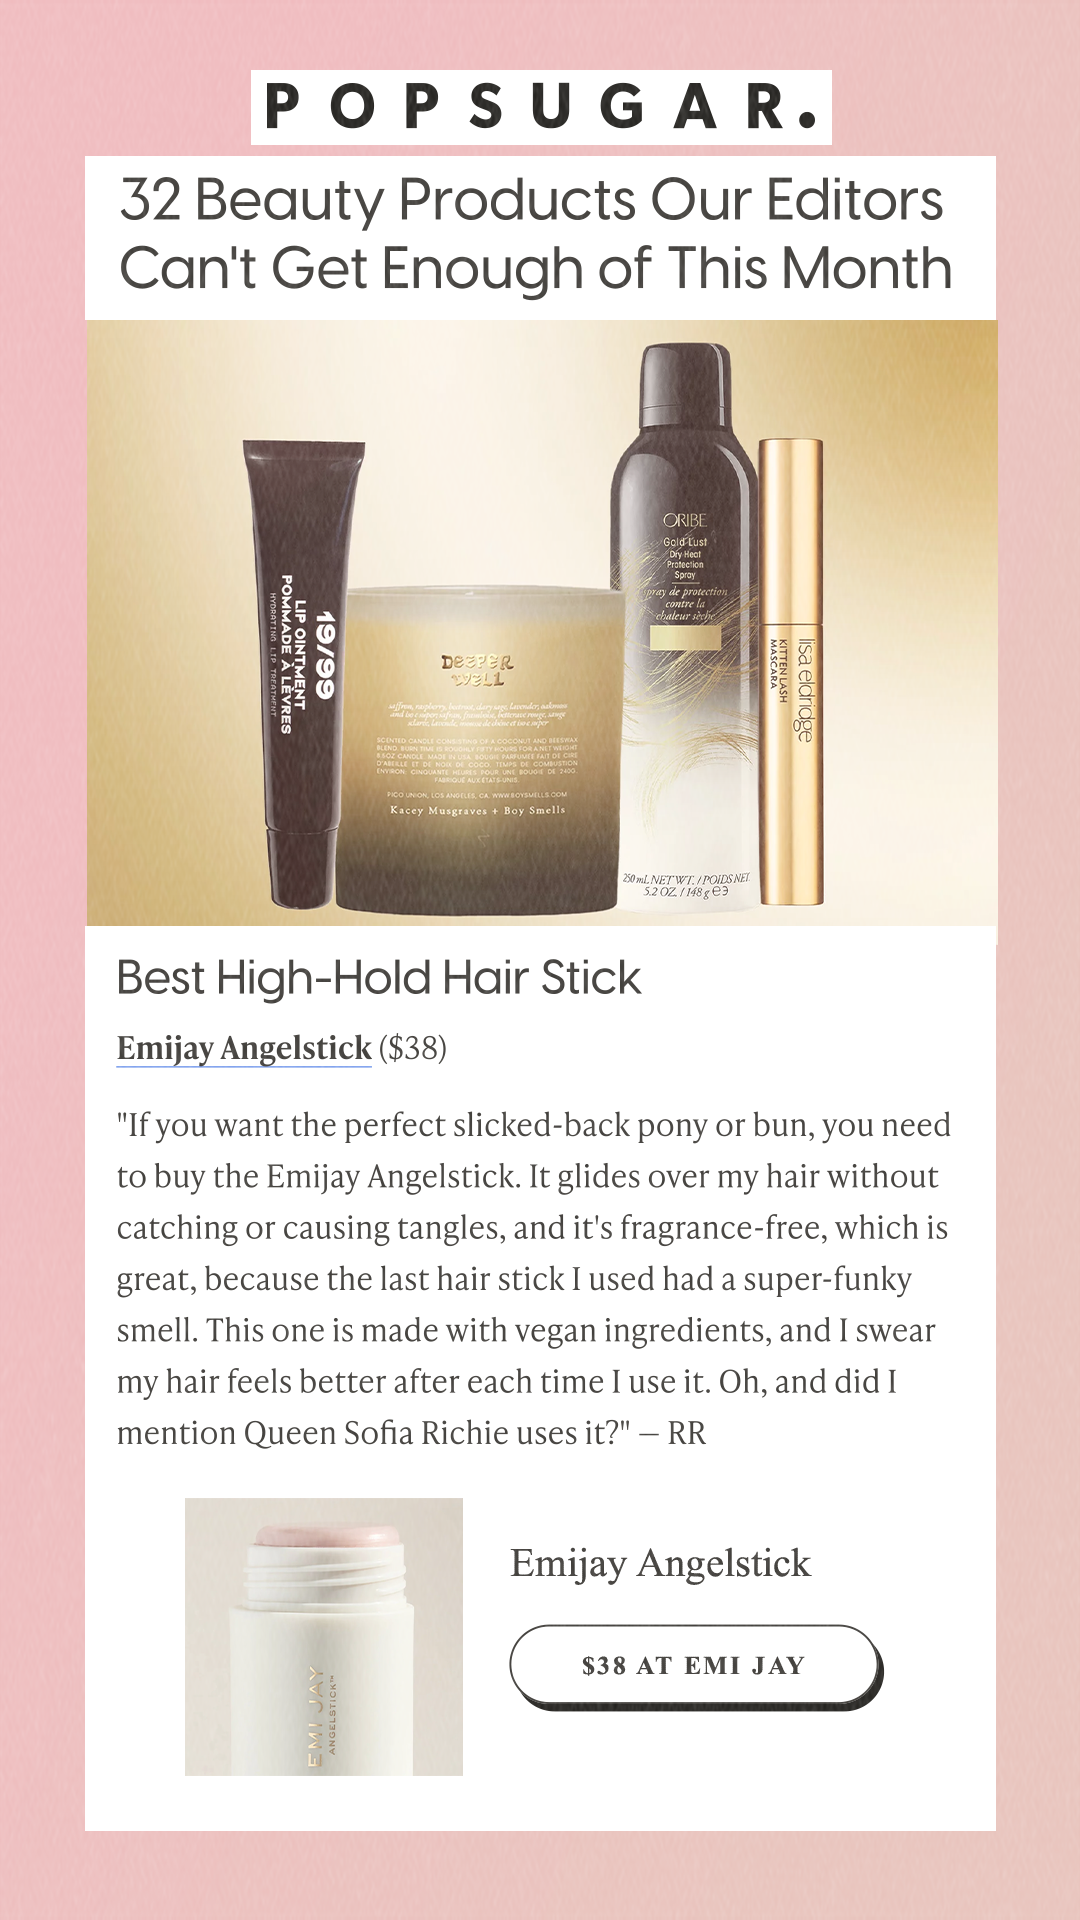 32 Beauty Products Our Editors Can't Get Enough of This Month Best High-Hold Hair StickEmijay Angelstick ($38)